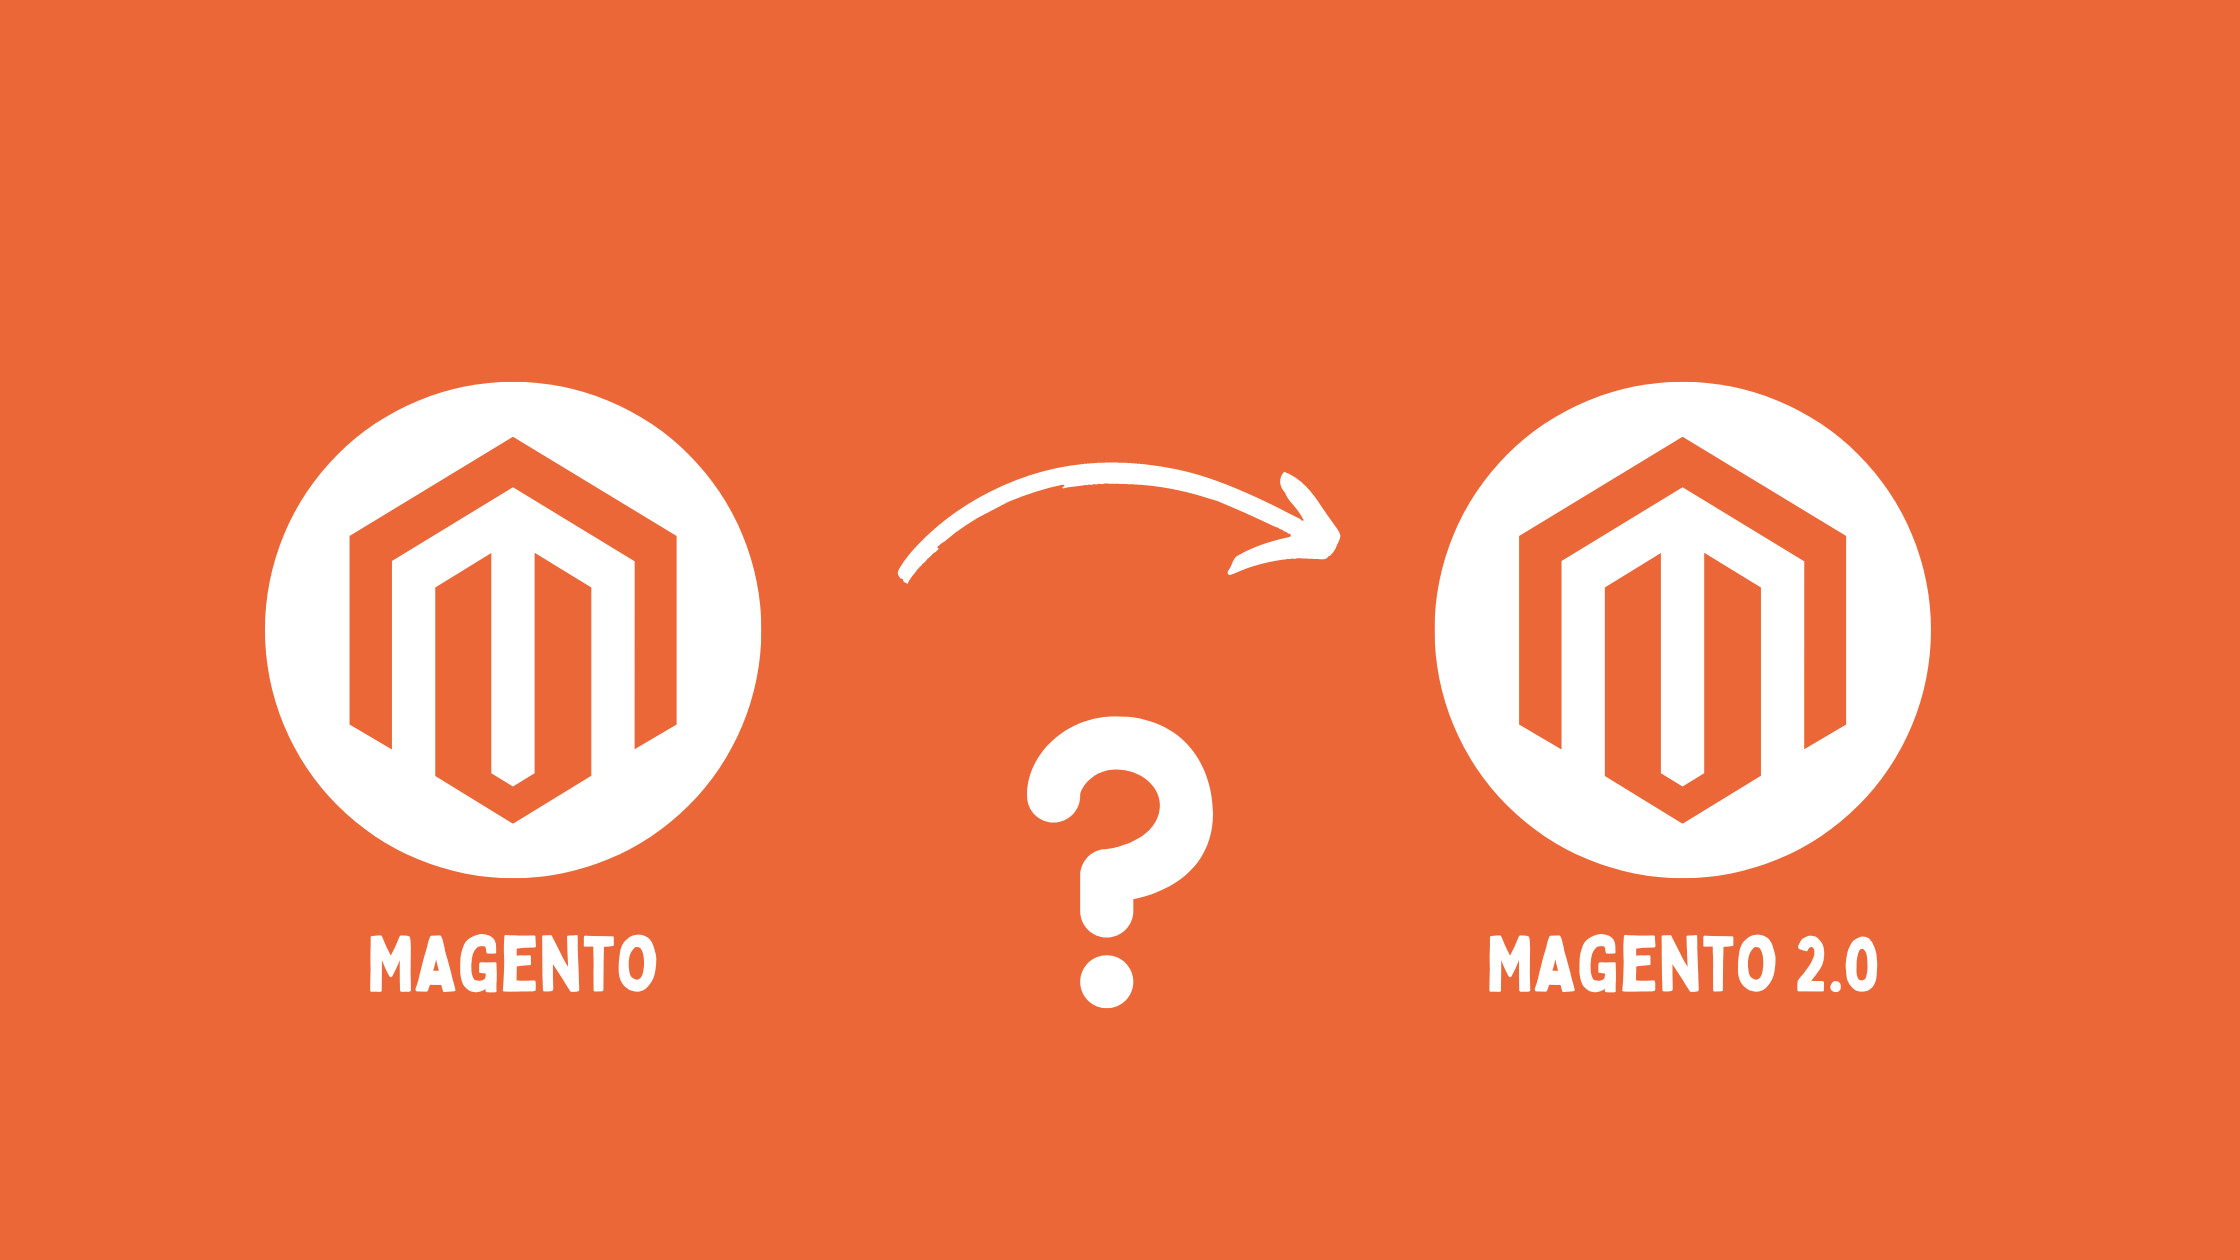 Upgrade Magento store from magento 1.x to 2.x